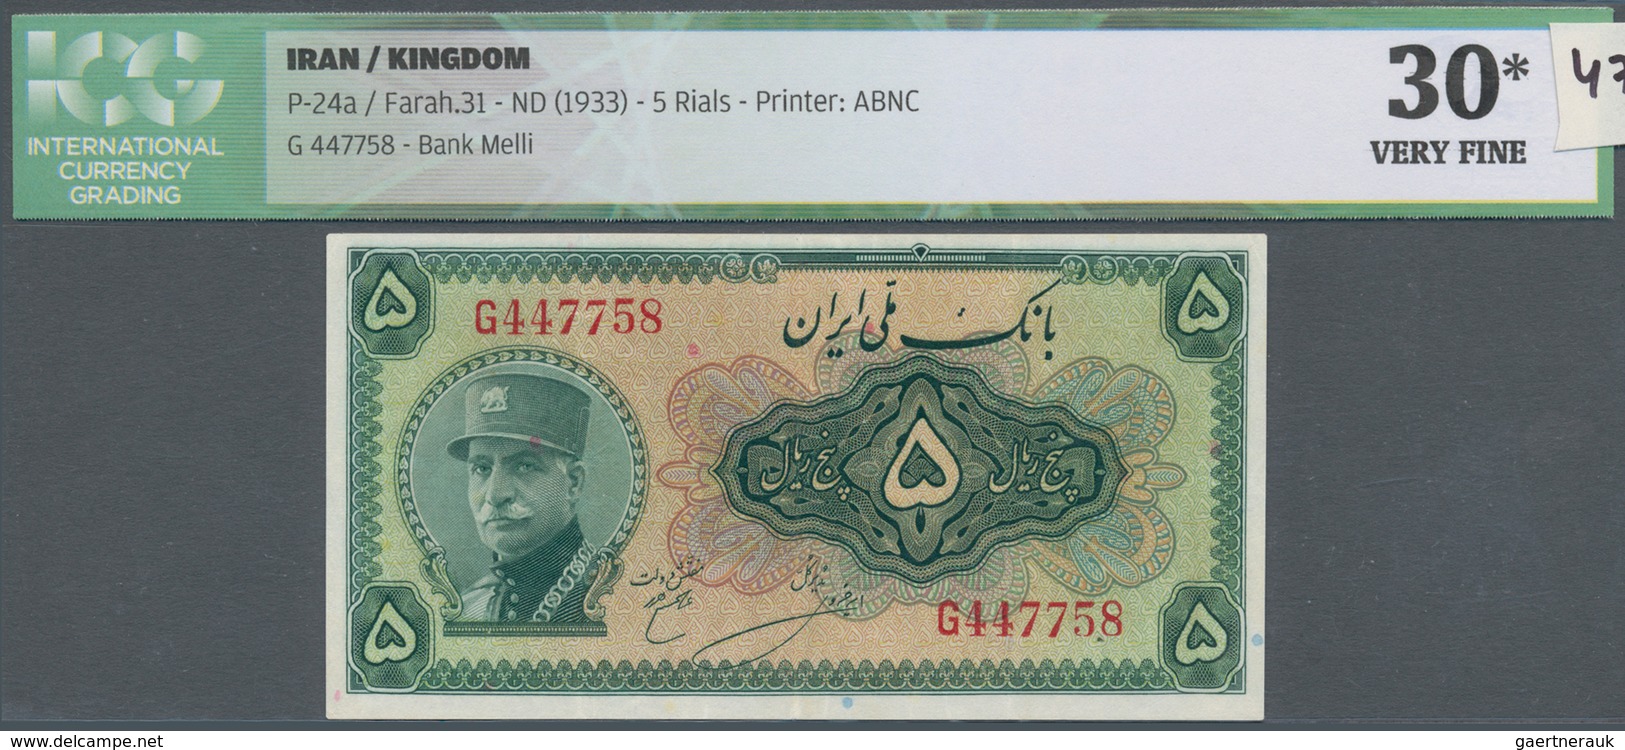 Iran: 5 Rials ND(1933) P. 24a, S/N #644758, With Center Fold And Handling In Paper, Additional Verti - Iran